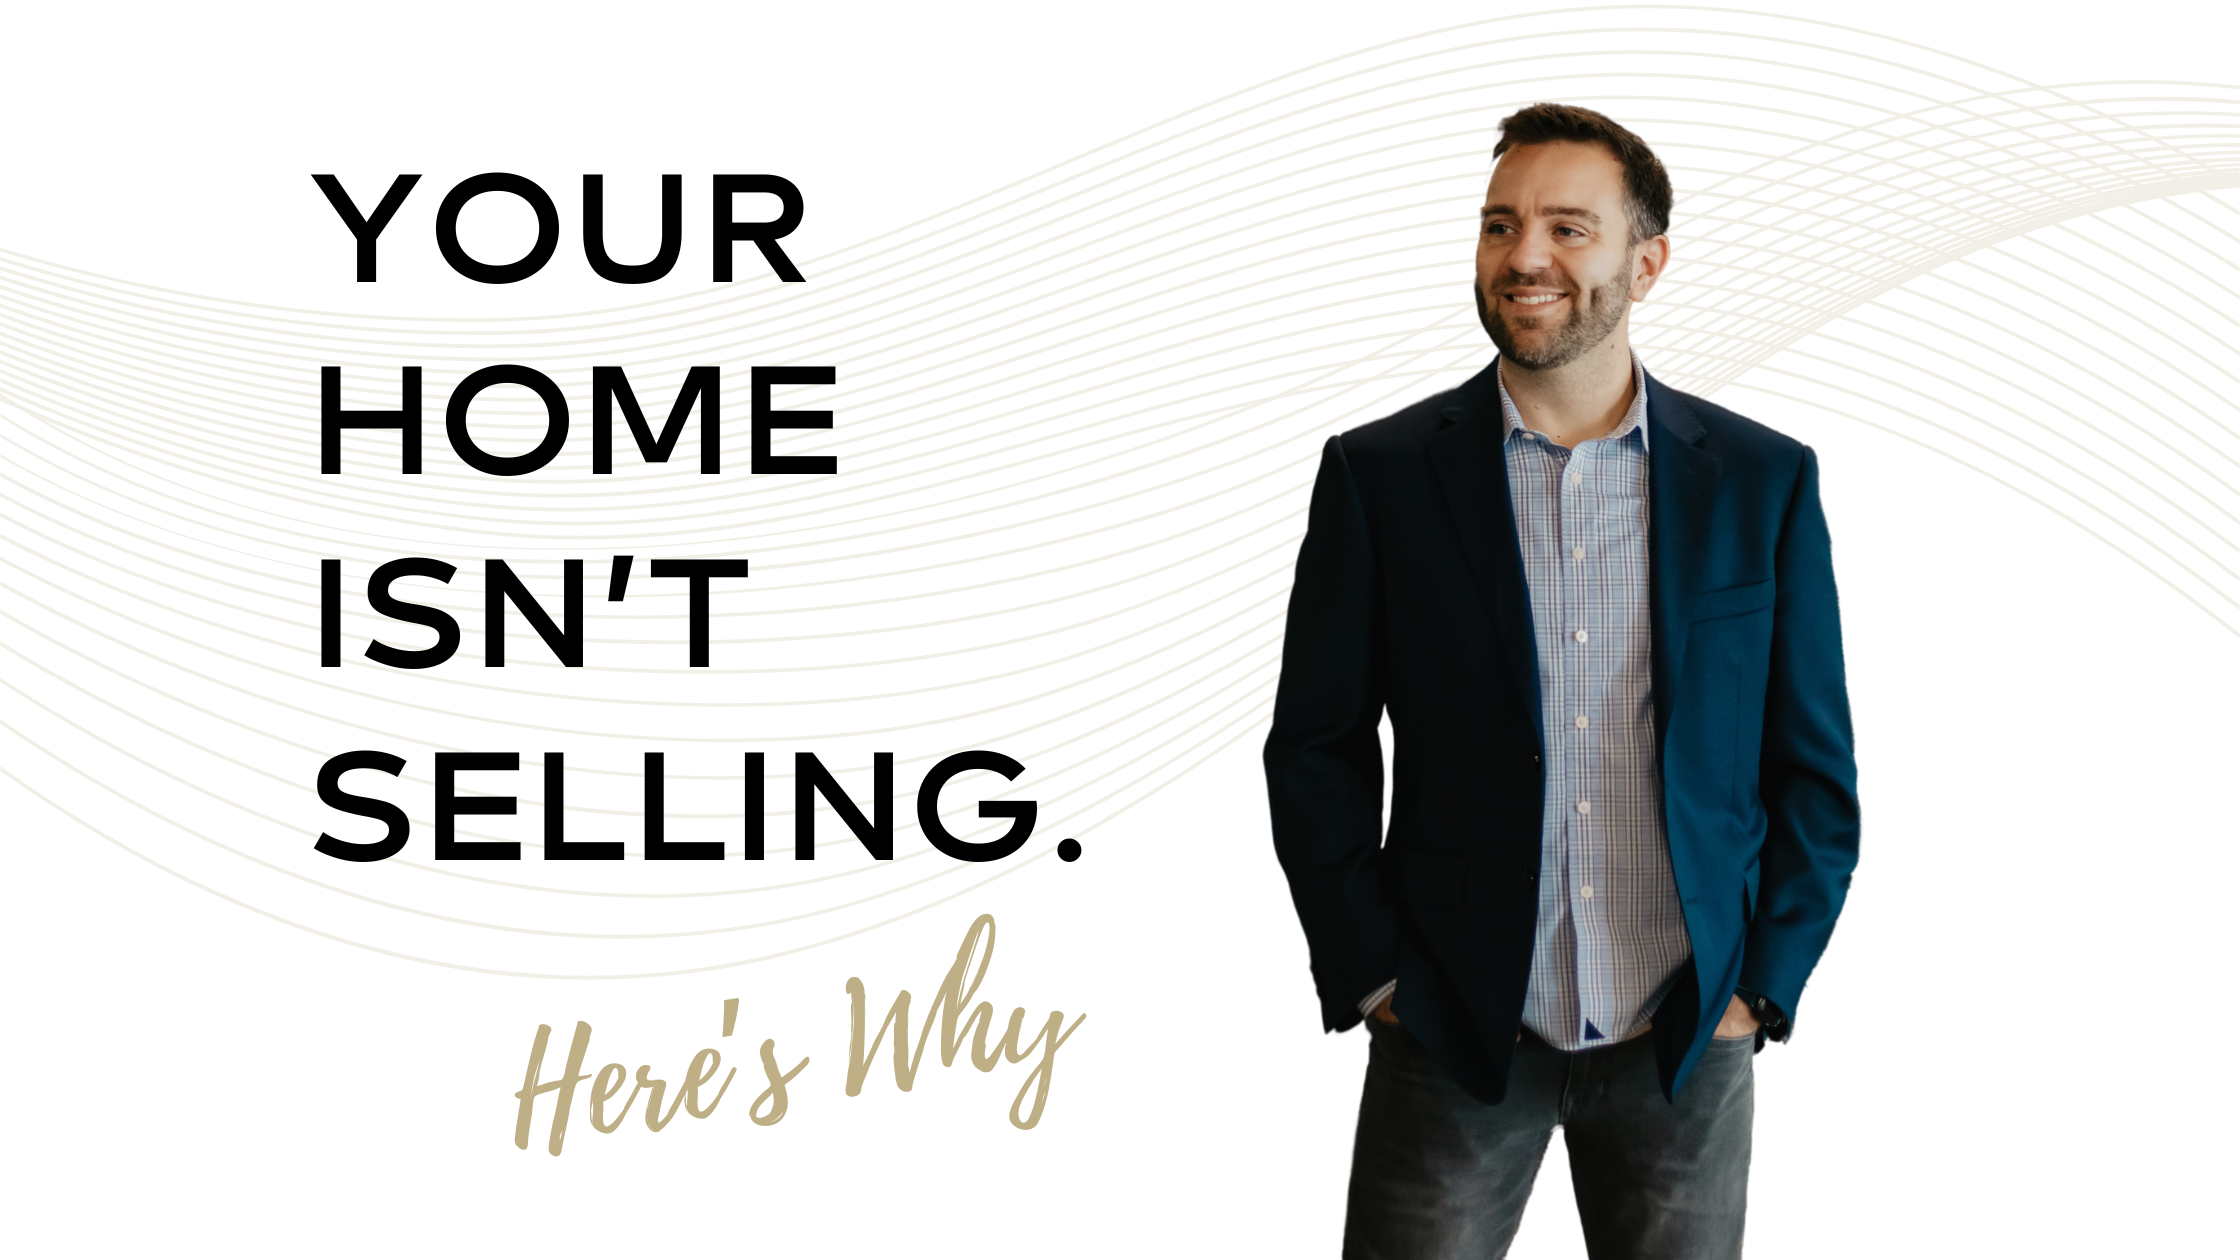 Your home isn't selling. Here's why